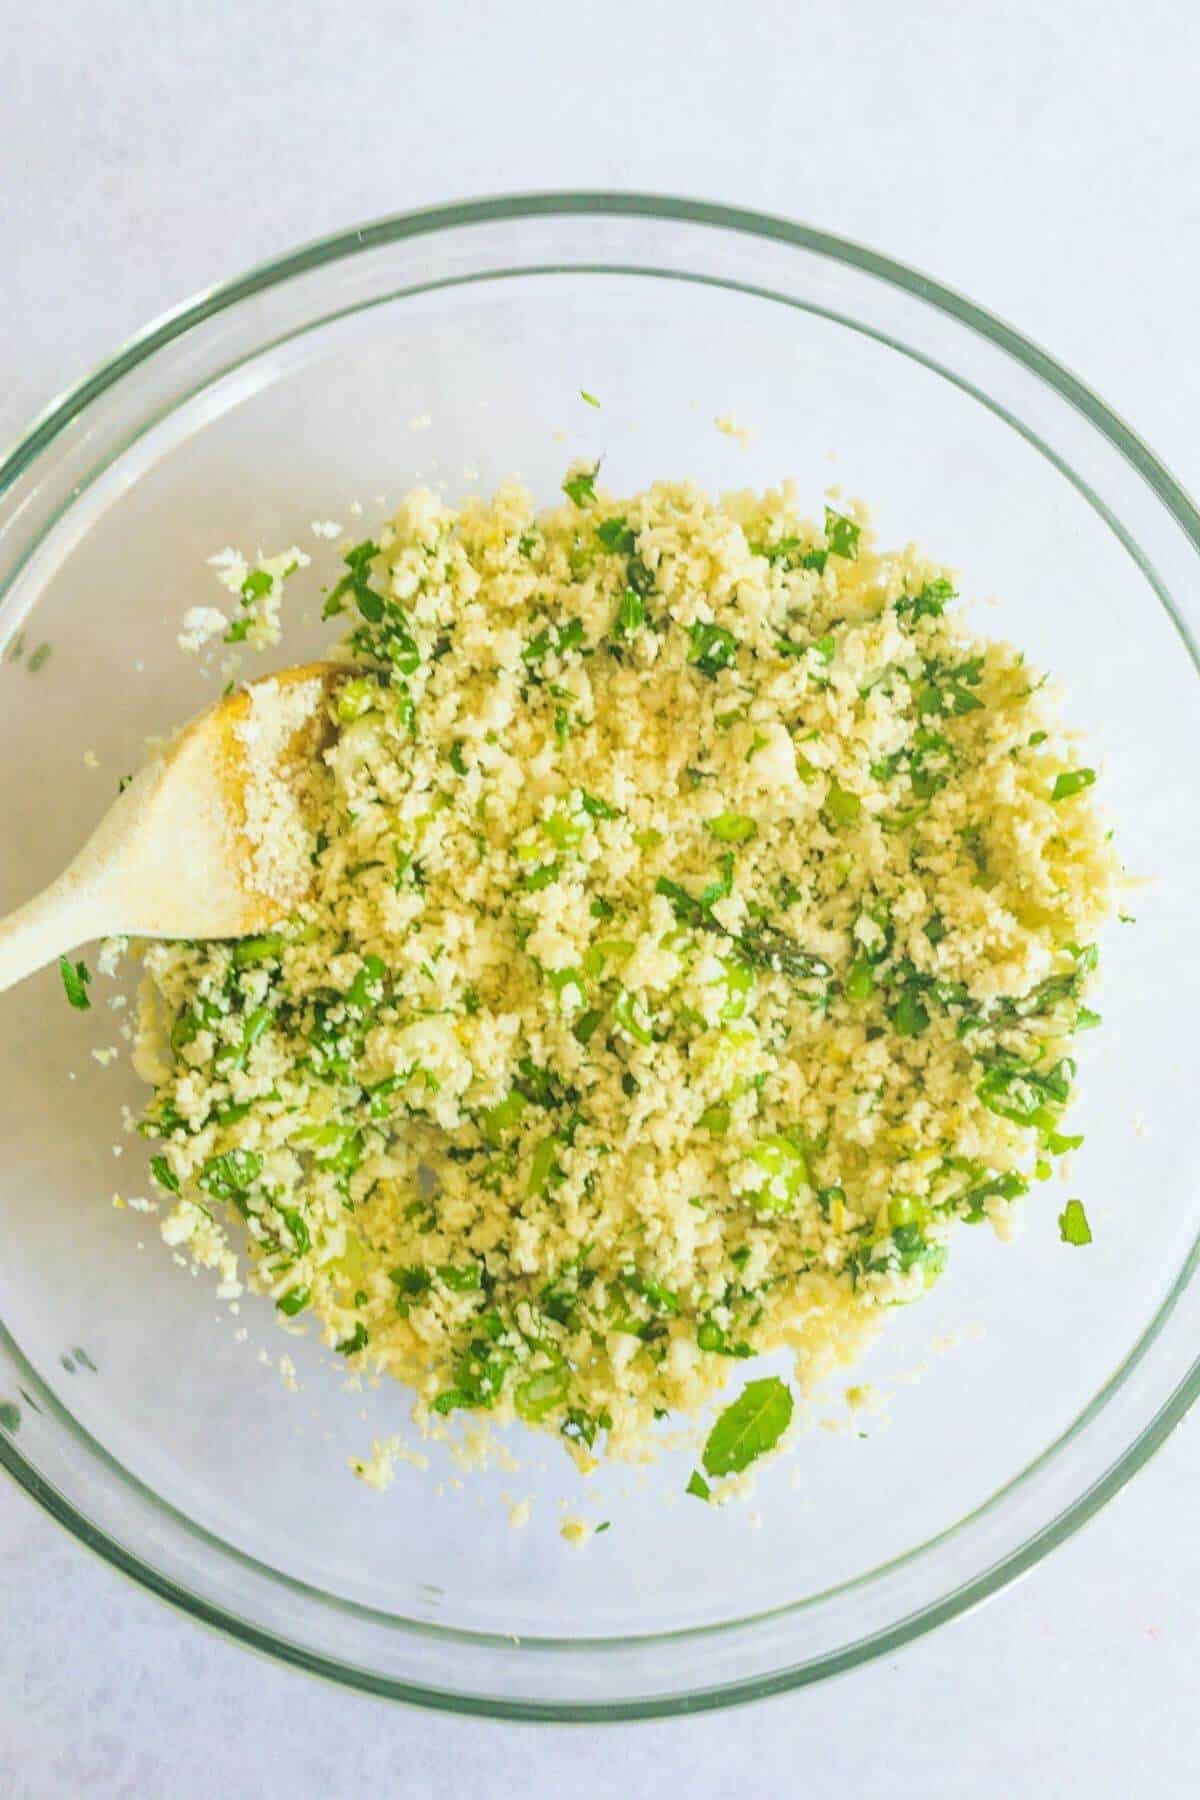 Green vegetables are stirred through a big glass bowl of cauliflower rice using a wooden spoon.